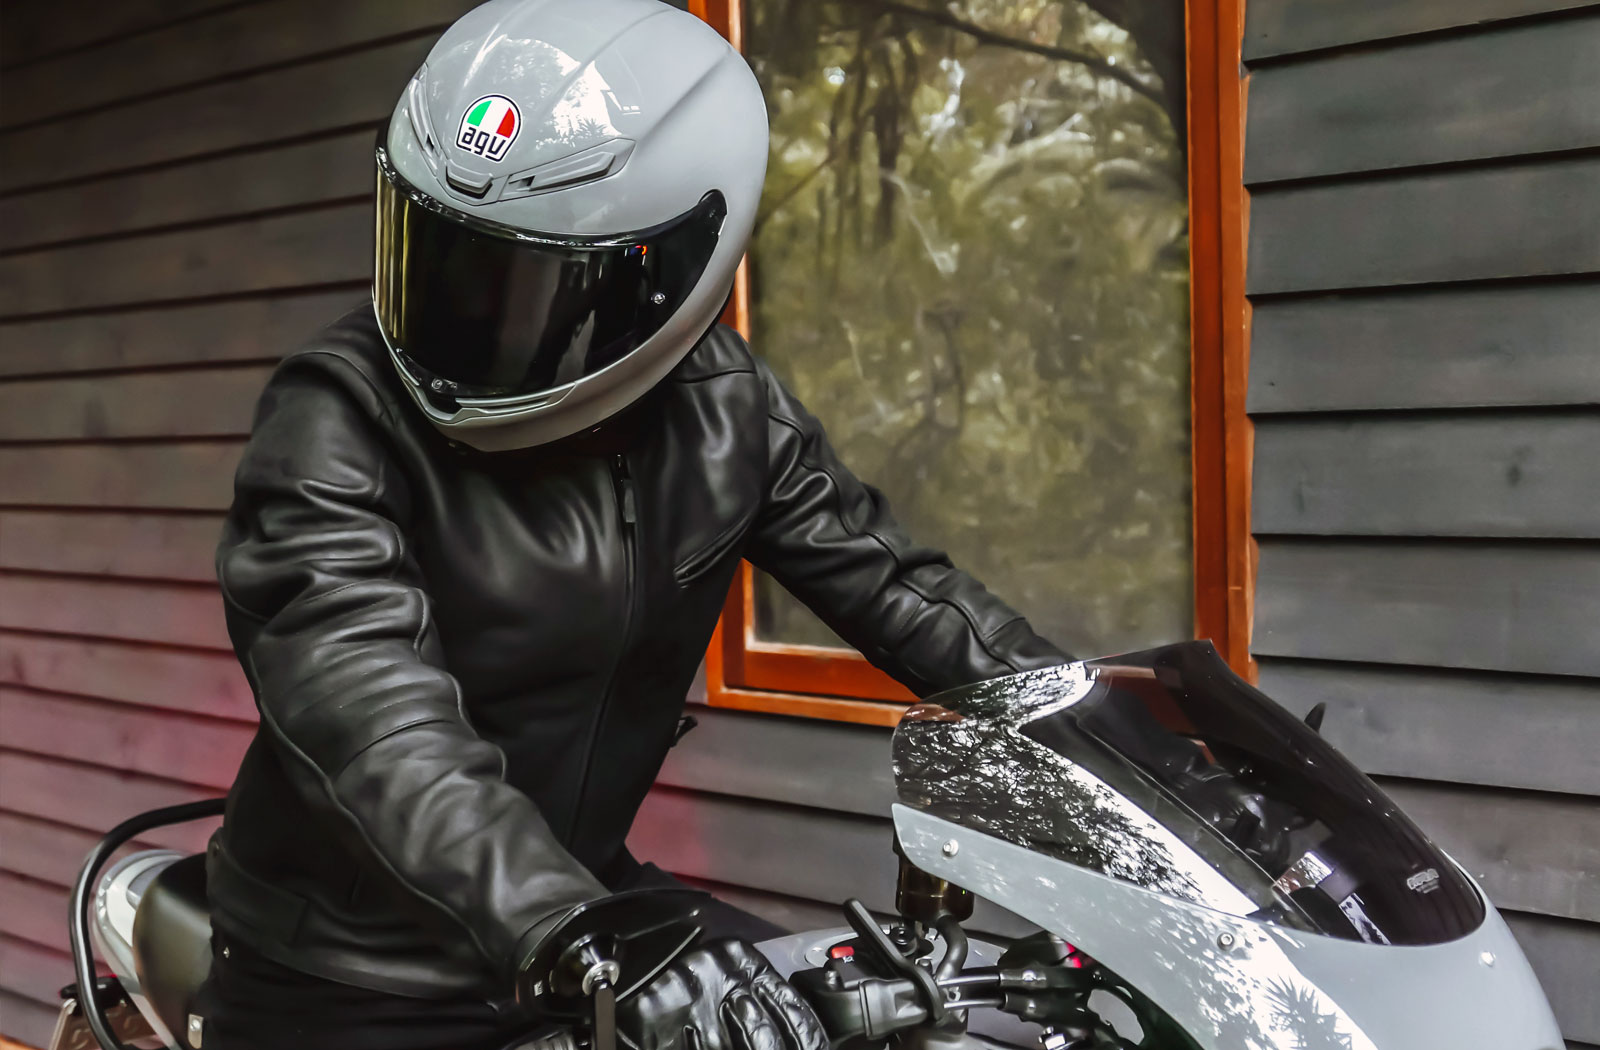 Riding Gear Review - Pando Moto Tatami LT 01 Leather Jacket